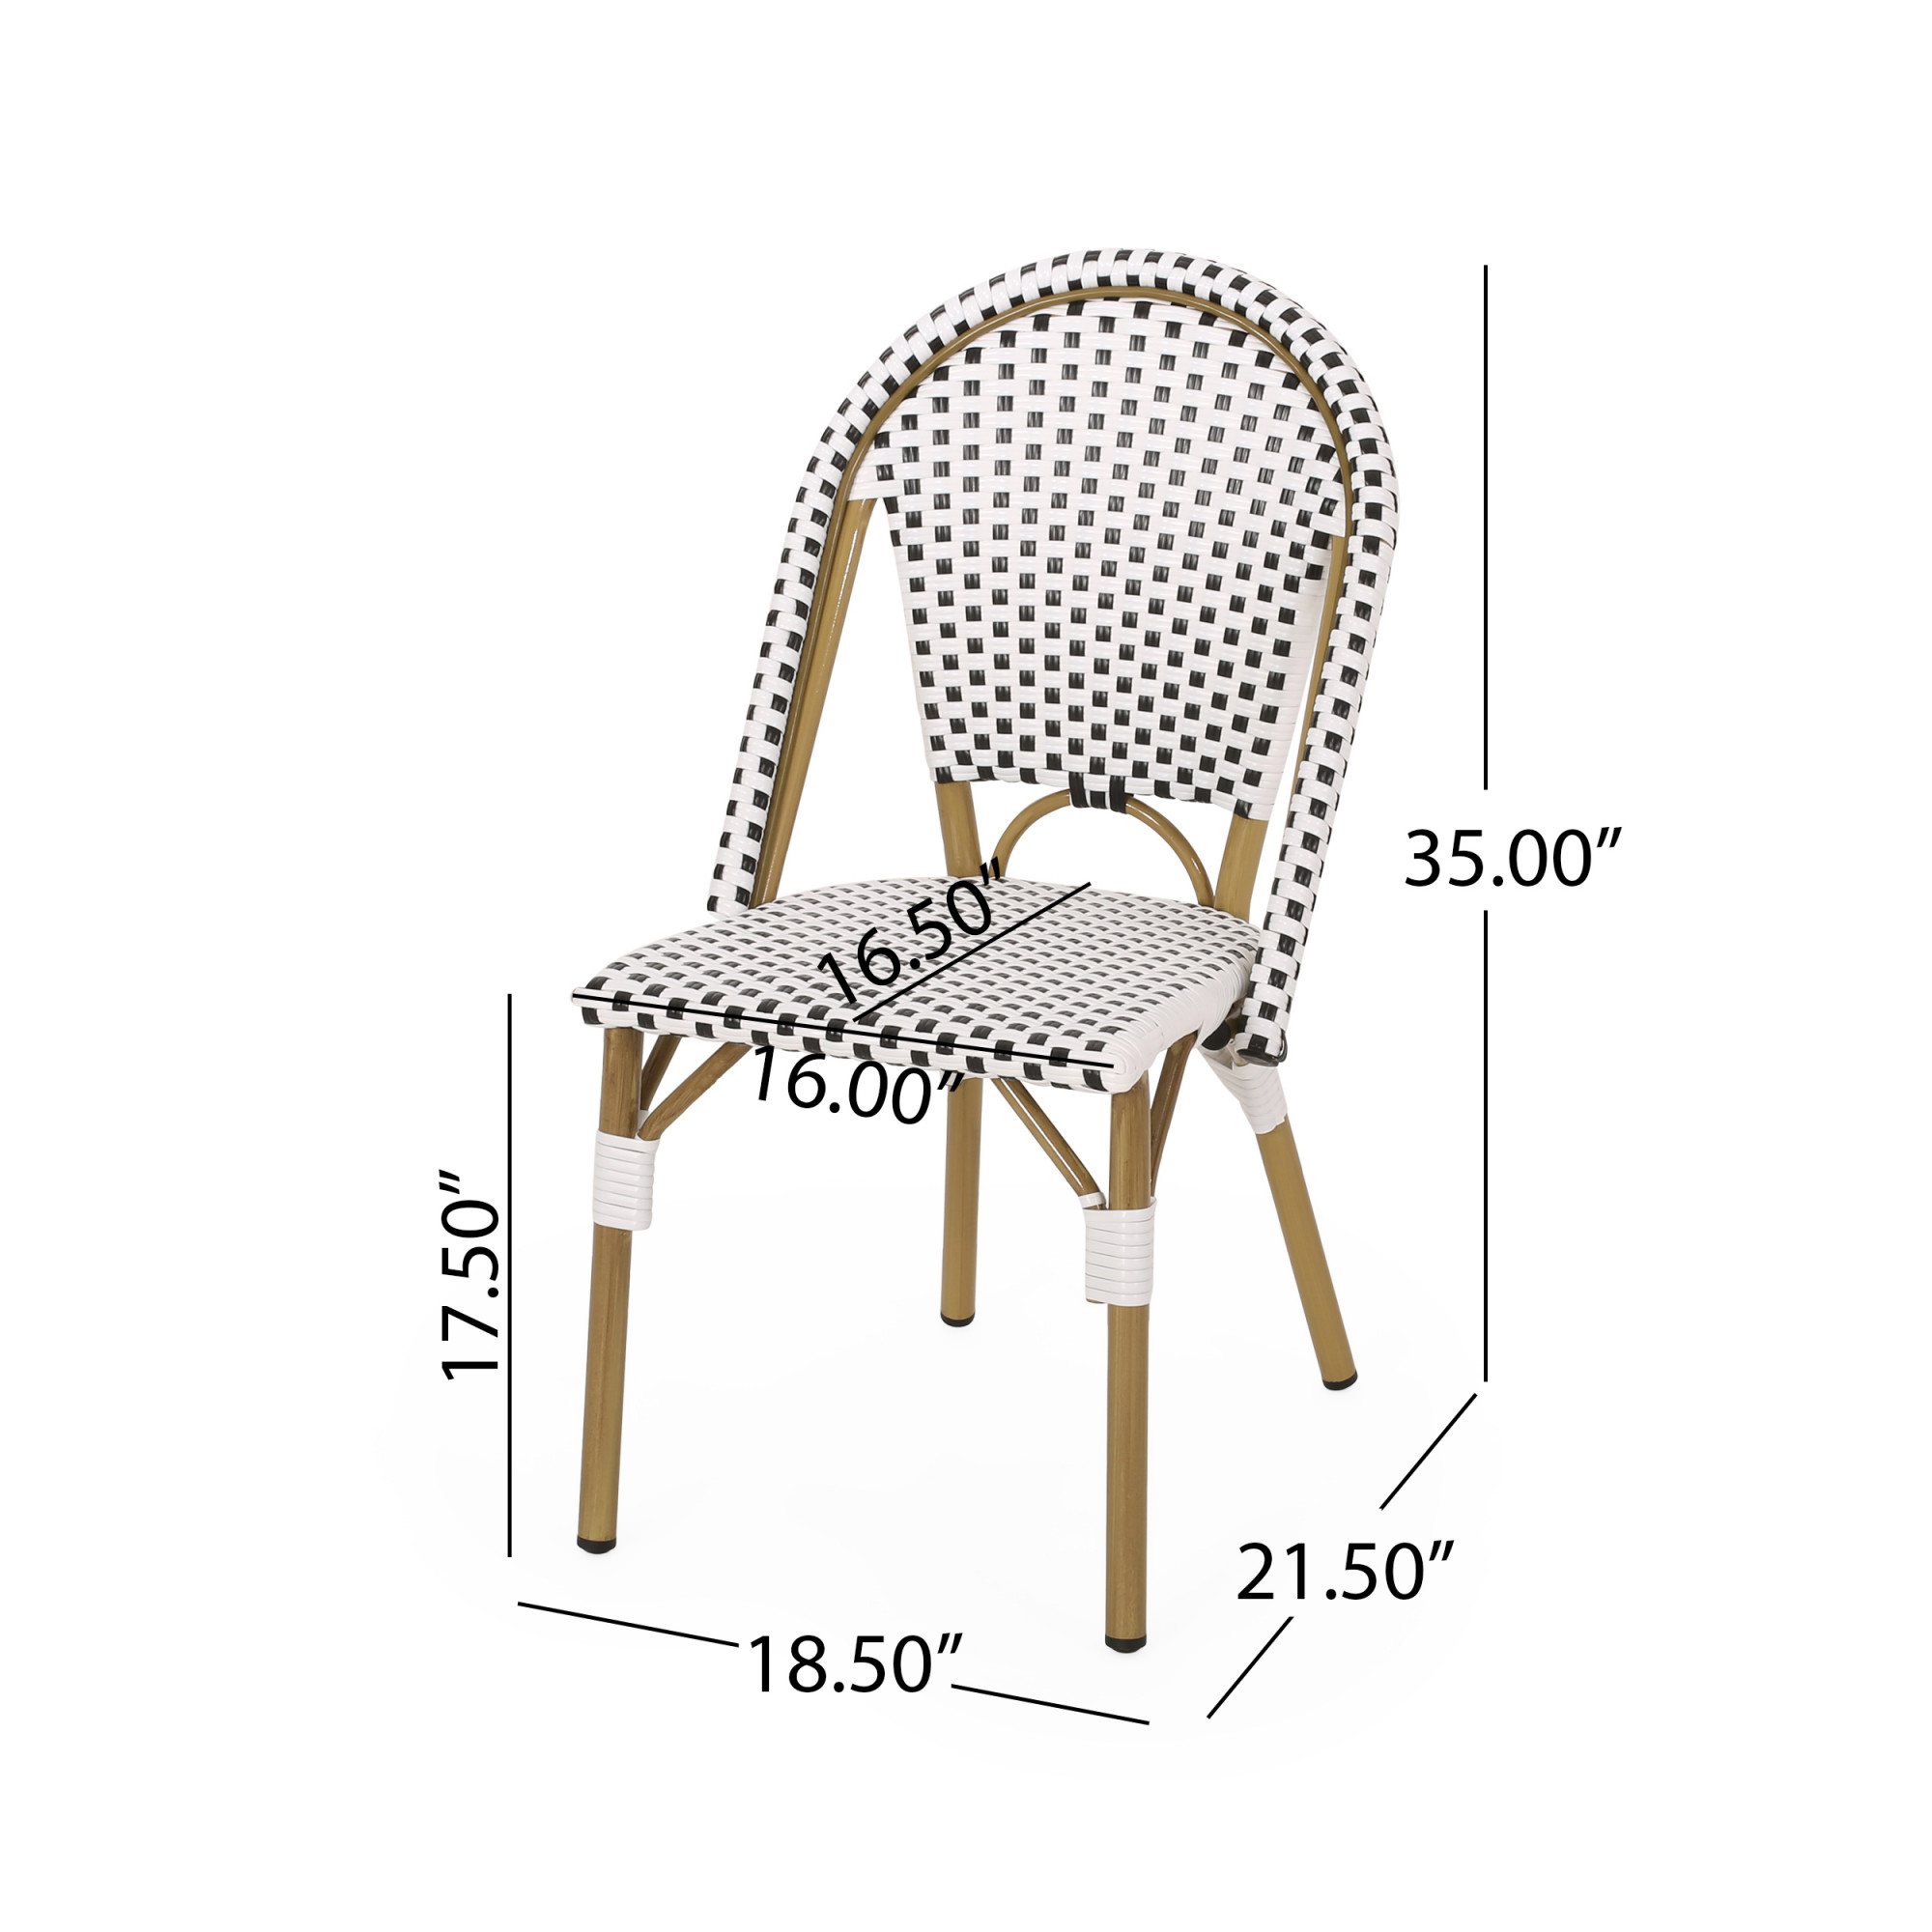 Elize Outdoor French Bistro Chair (Set of 4), Black, White, and Bamboo ...